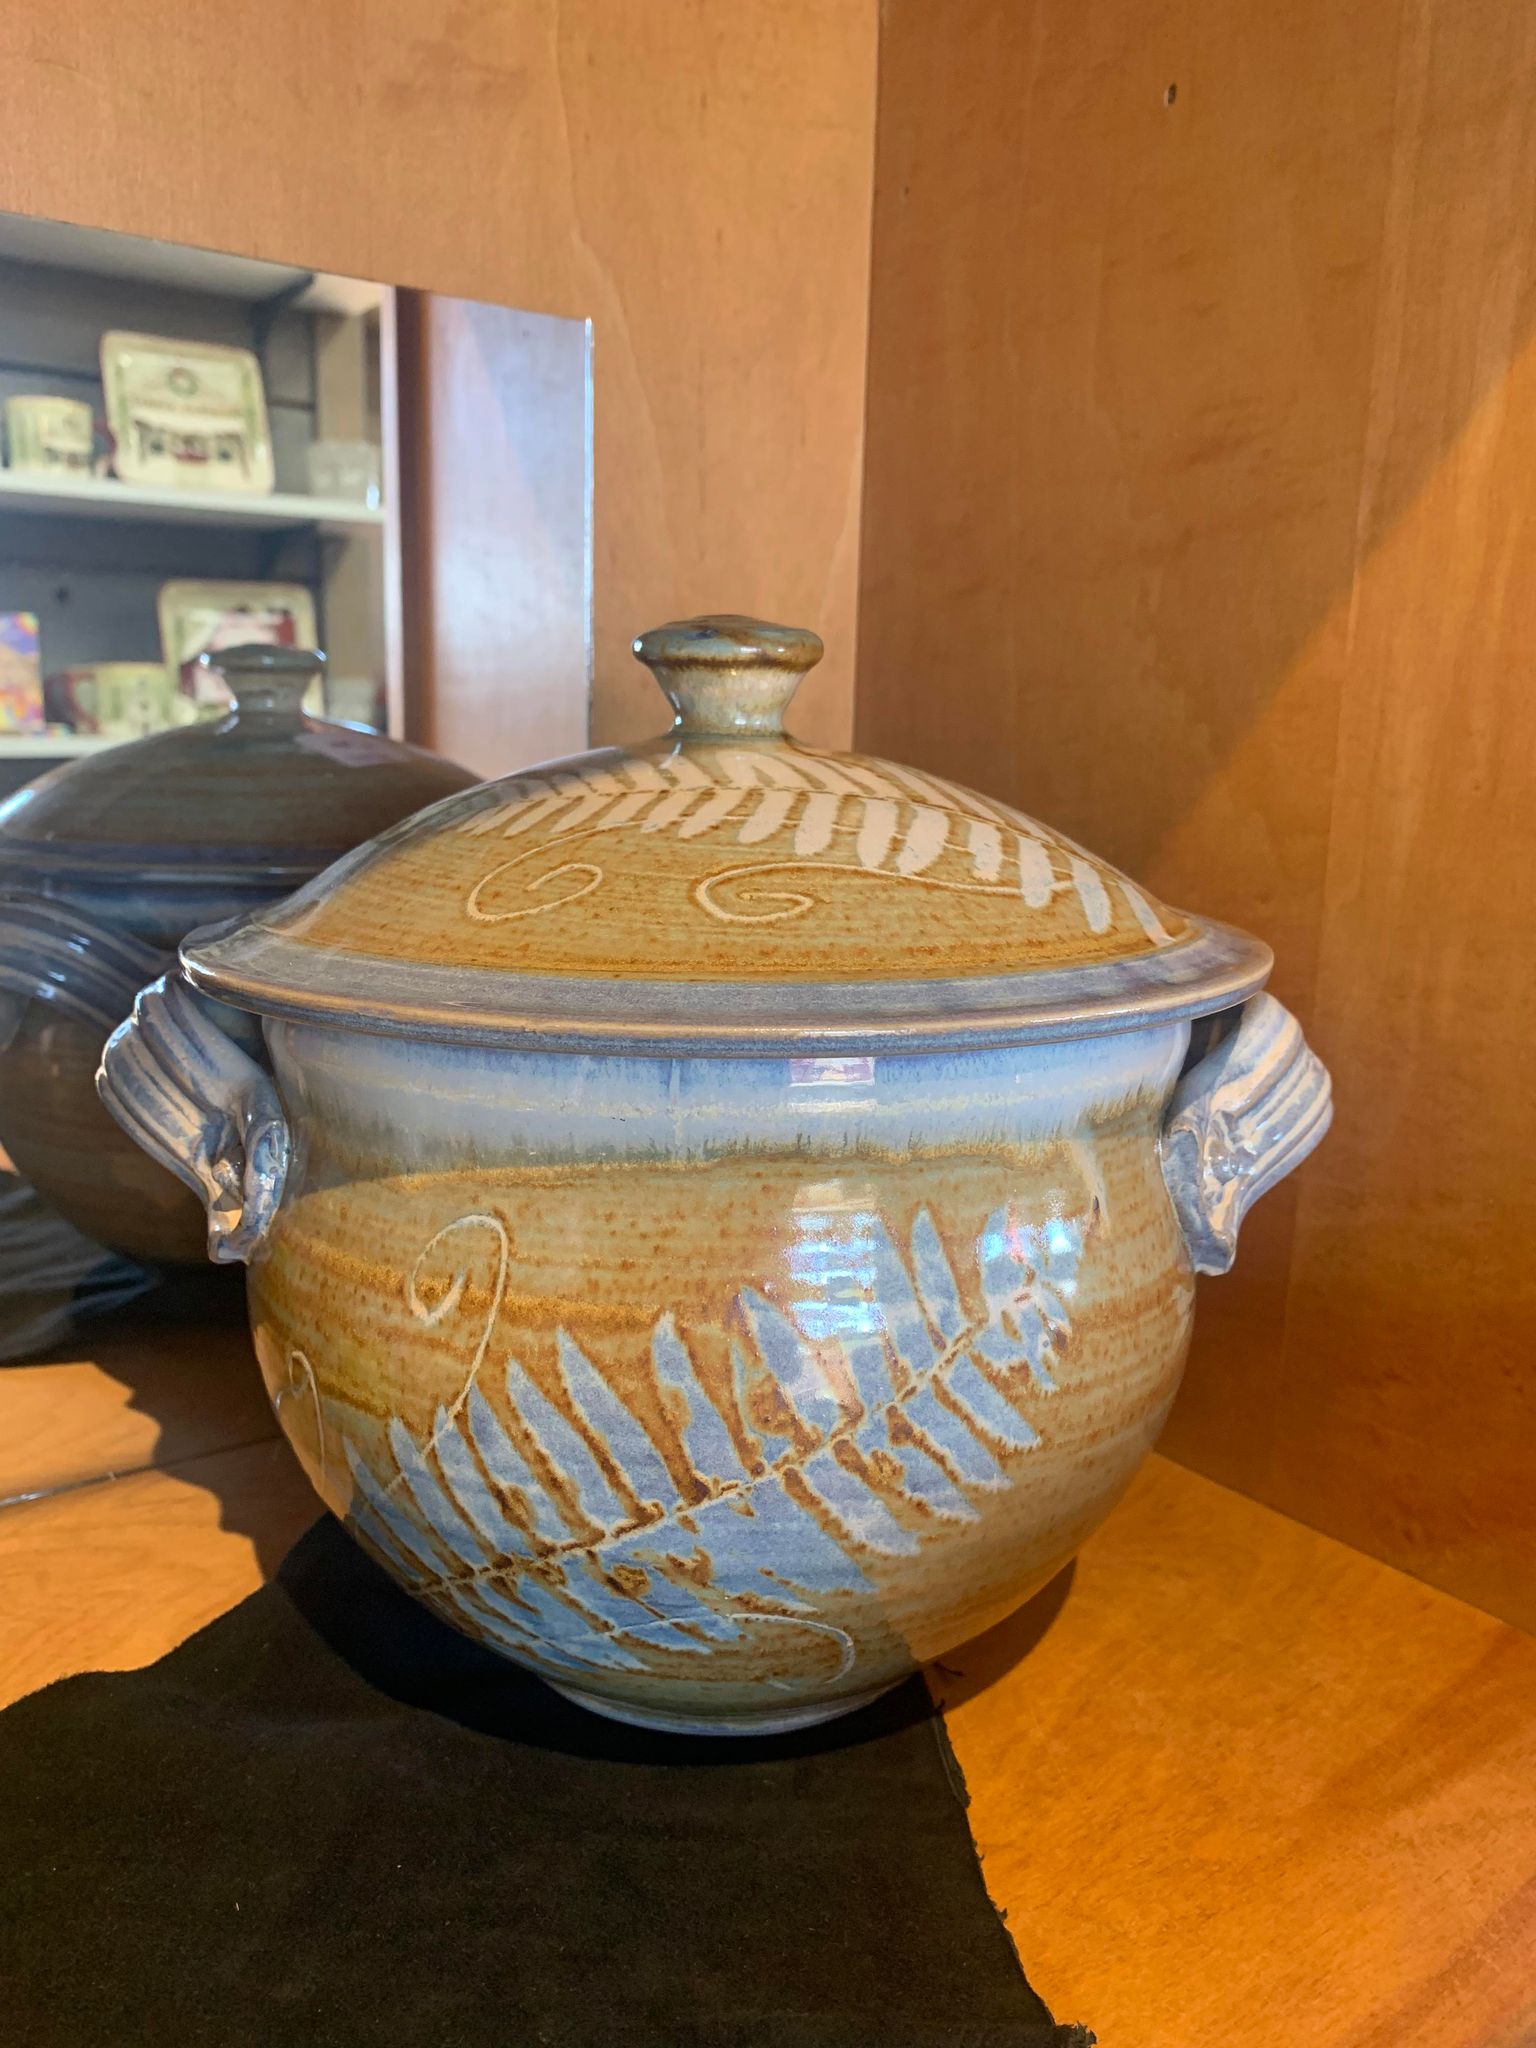 A Perry Munn Pottery Fern Casserole Dish with Lid sits on top of a mirror lid.